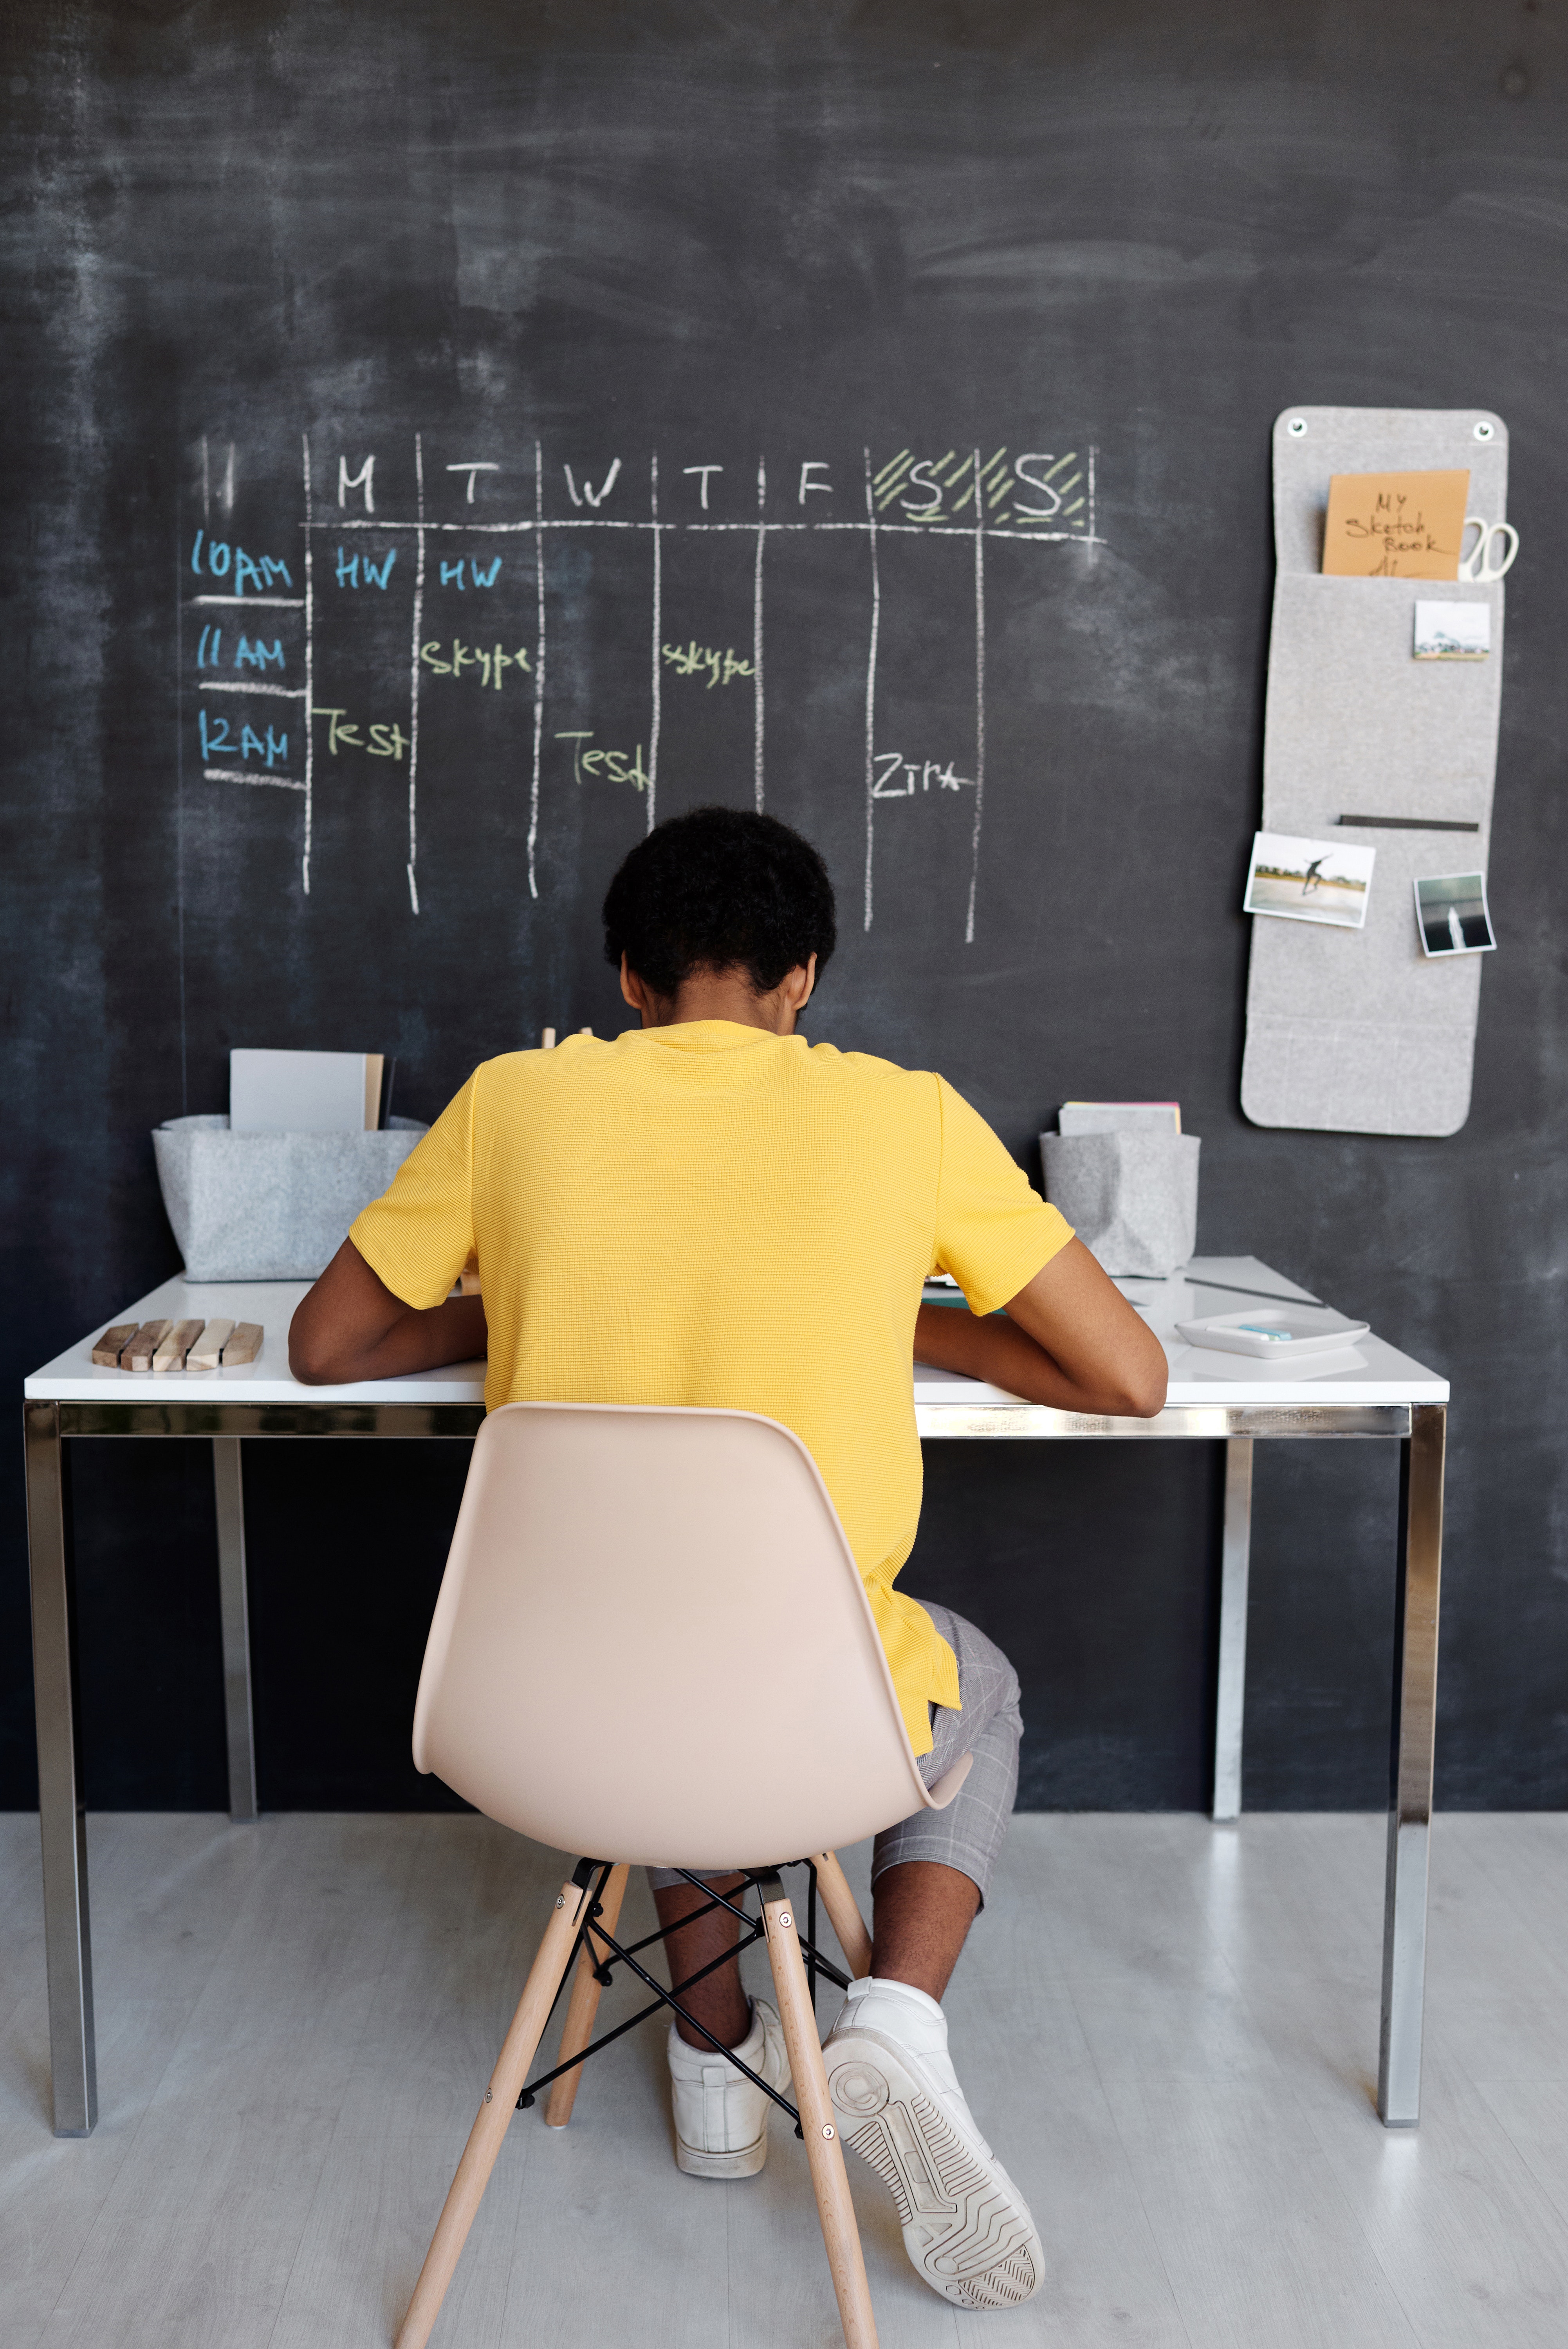 Boy in yellow shirt at desk facing a chalk board with a schedule